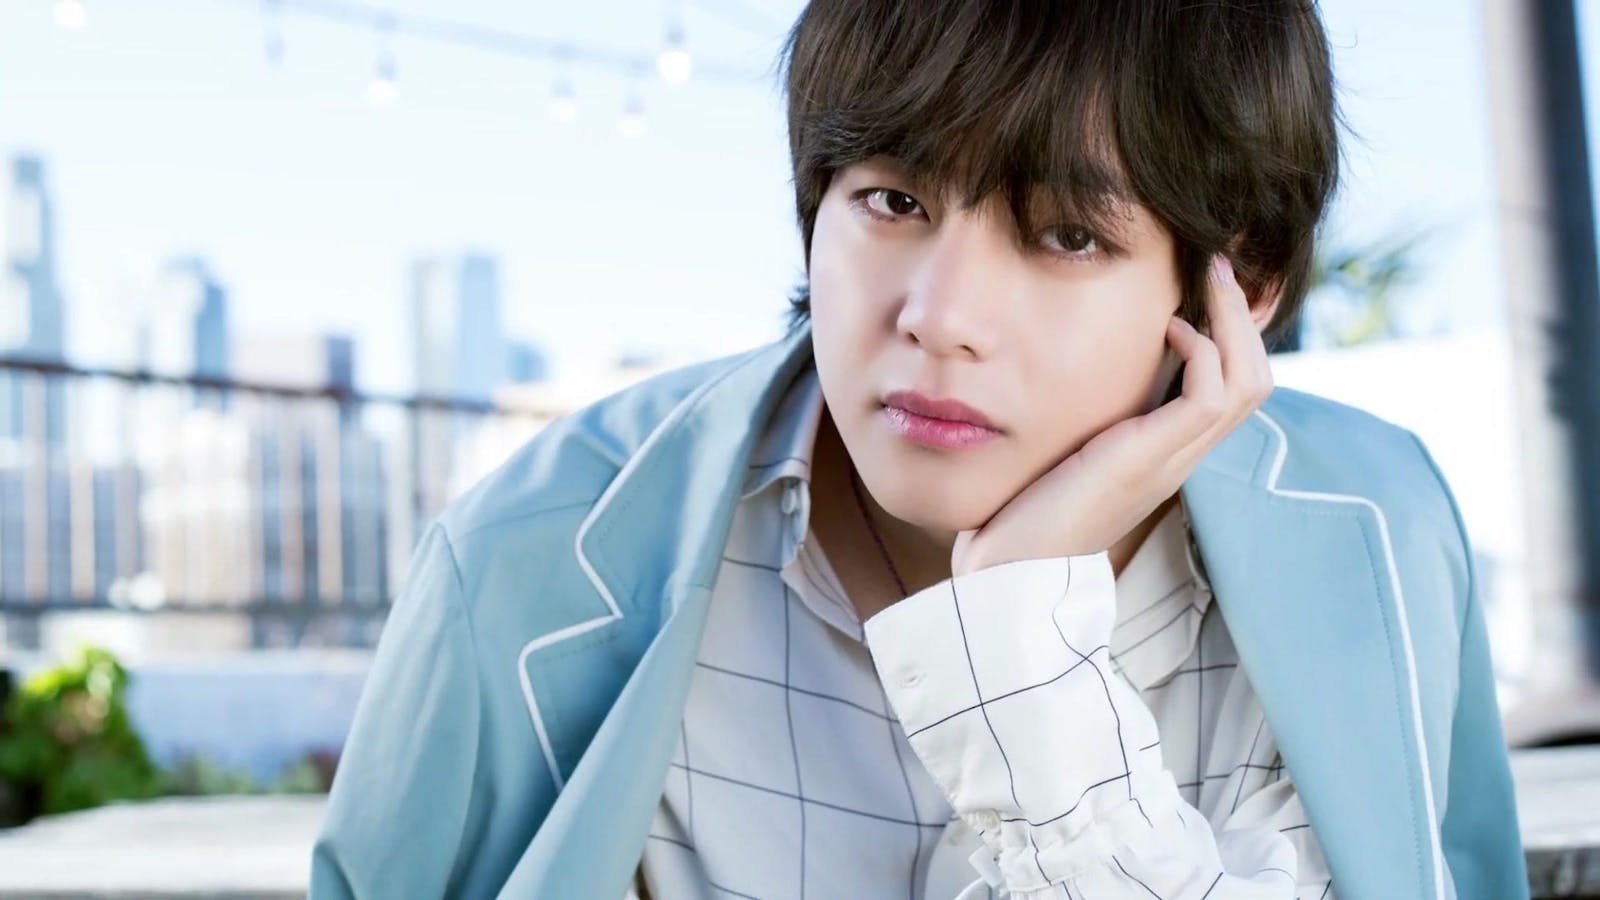 BTS V's New Album 'Layover': Release Date, Tracklist, 'Love Me Again',  Concept, and More